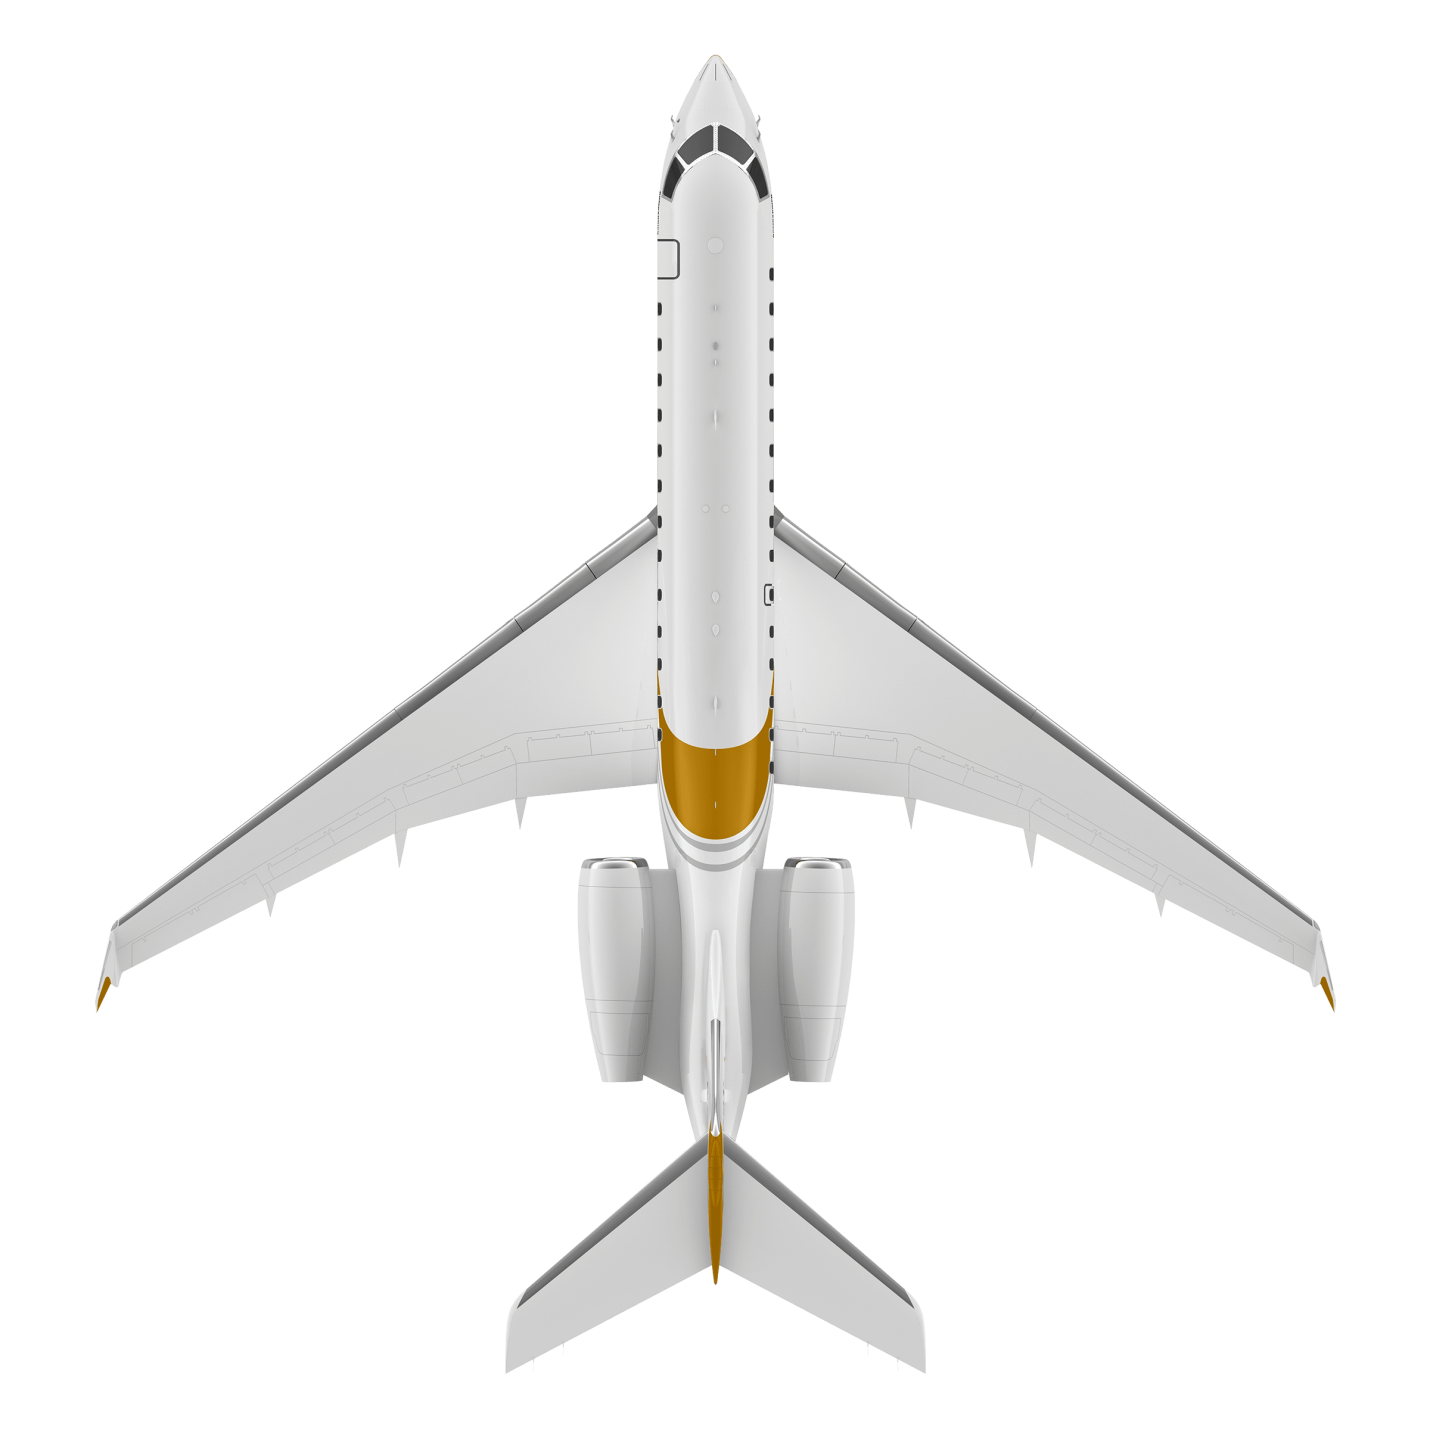 Bombardier Private Jet Plane Download Free PNG